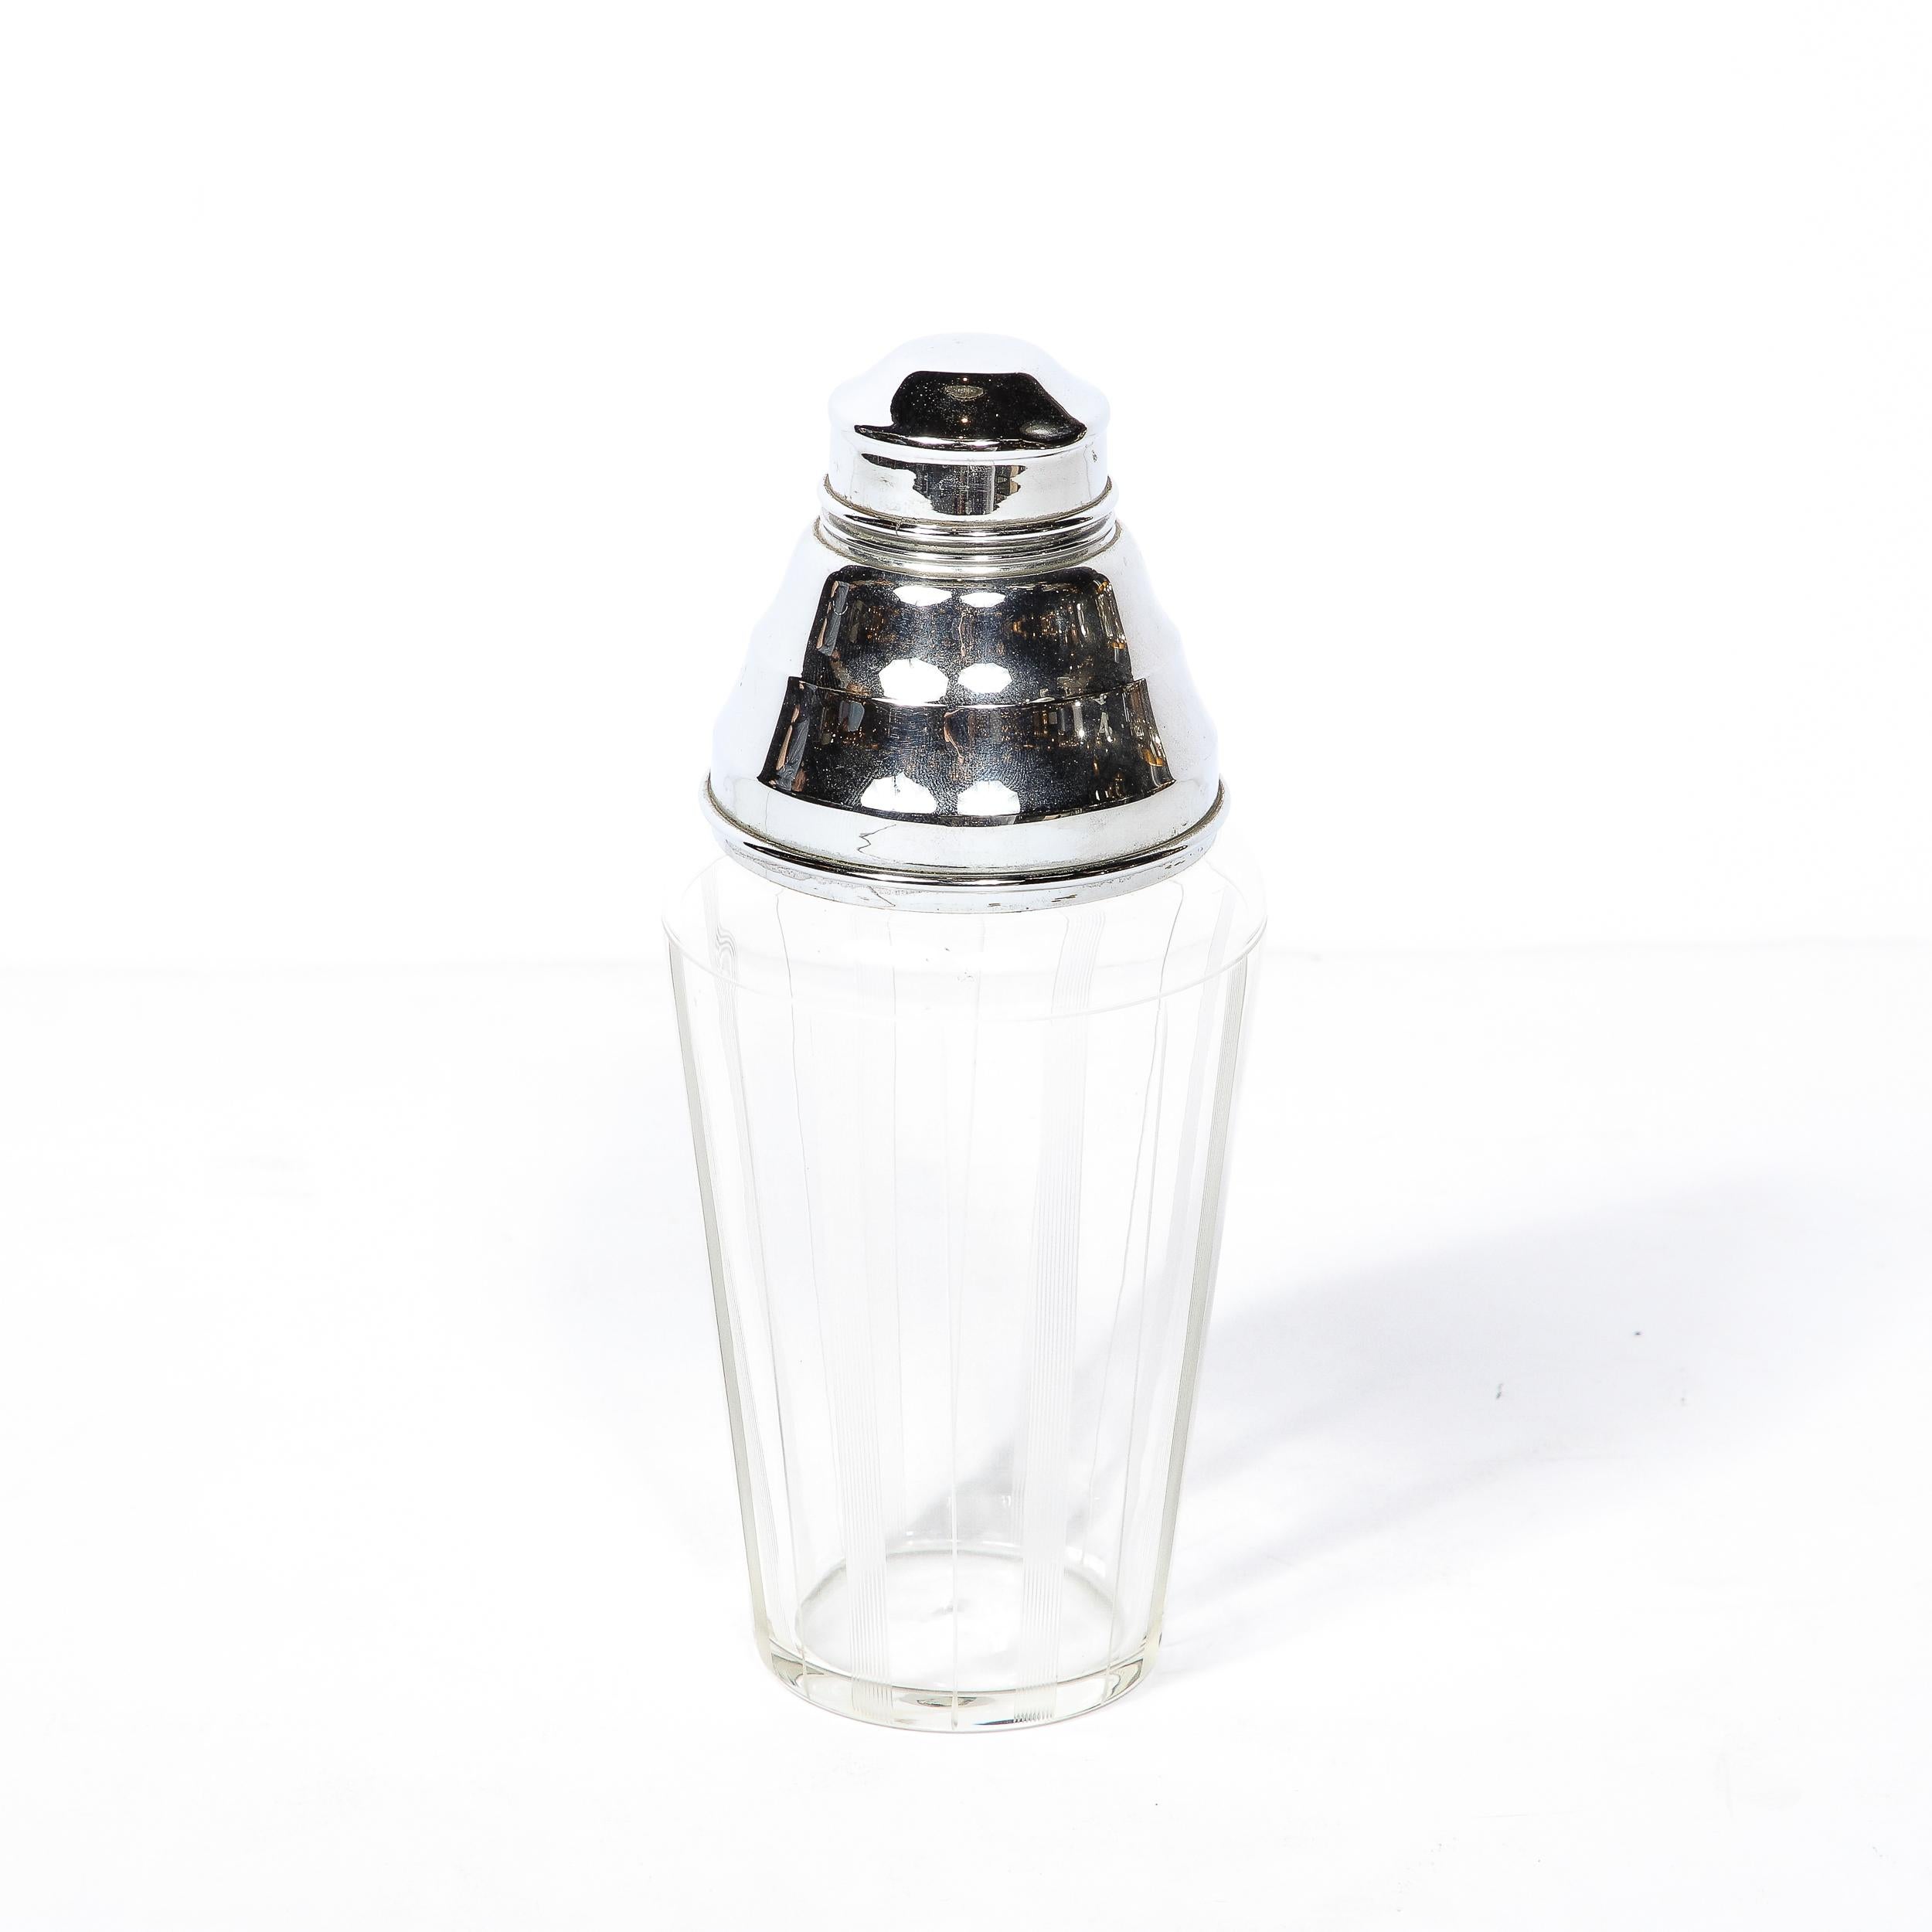 A gorgeous Art Deco Cocktail Shaker in Chrome, this piece was Made in the United States Circa 1935. It features a streamlined Chrome Strainer and Lid with a Glass Body accented with vertically etched fluted detailing in transparent glass. This